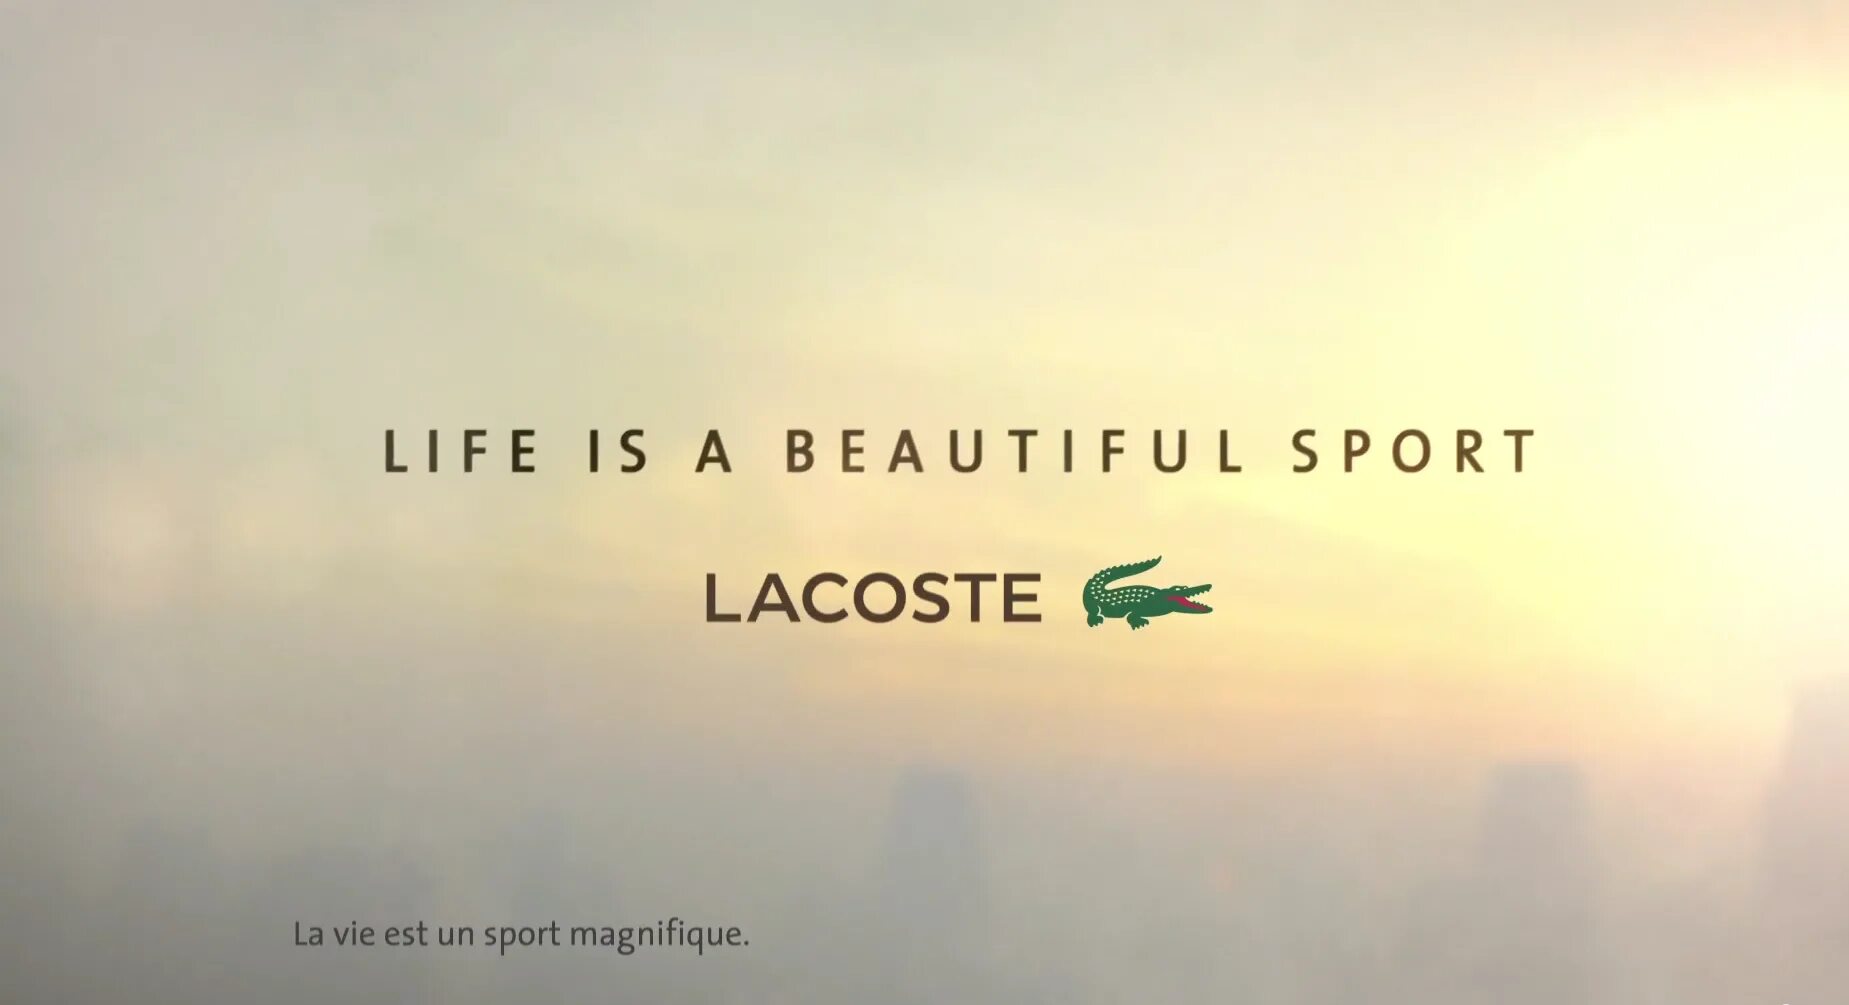 Life is life год. Слоган лакост. Life is beautiful Sport Lacoste. Лакост лакост лайф. Lacoste реклама.